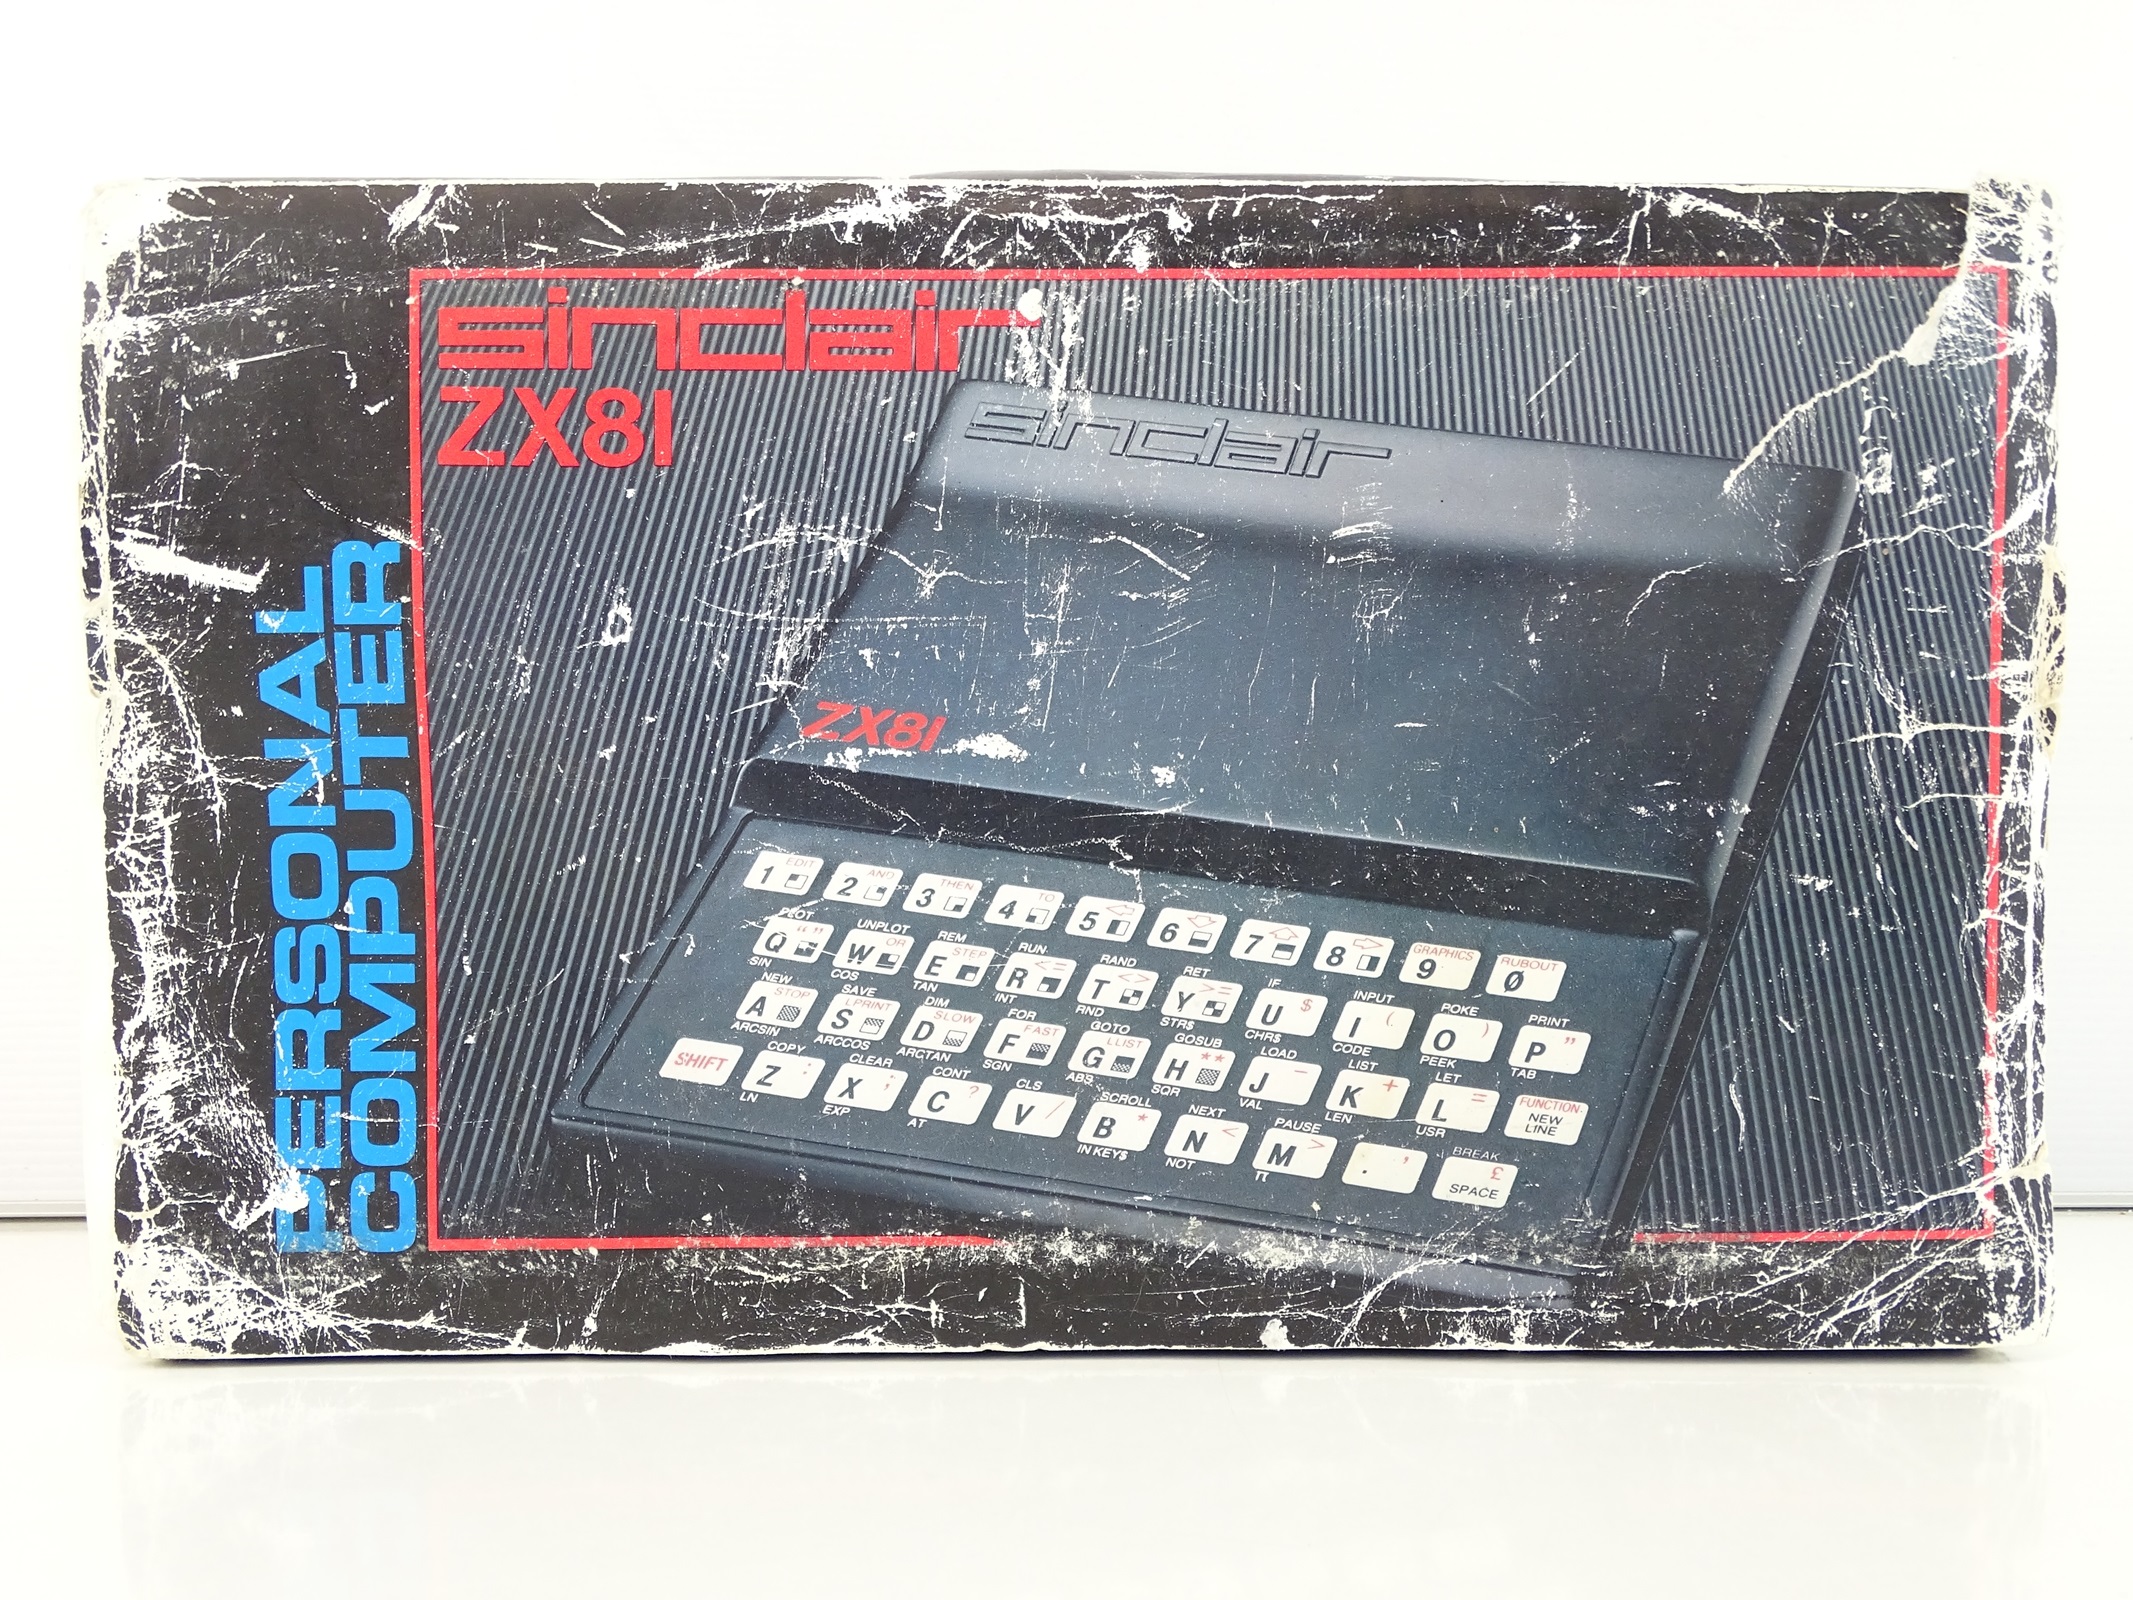 Lot 107 - Sinclair ZX81 Personal Computer - the